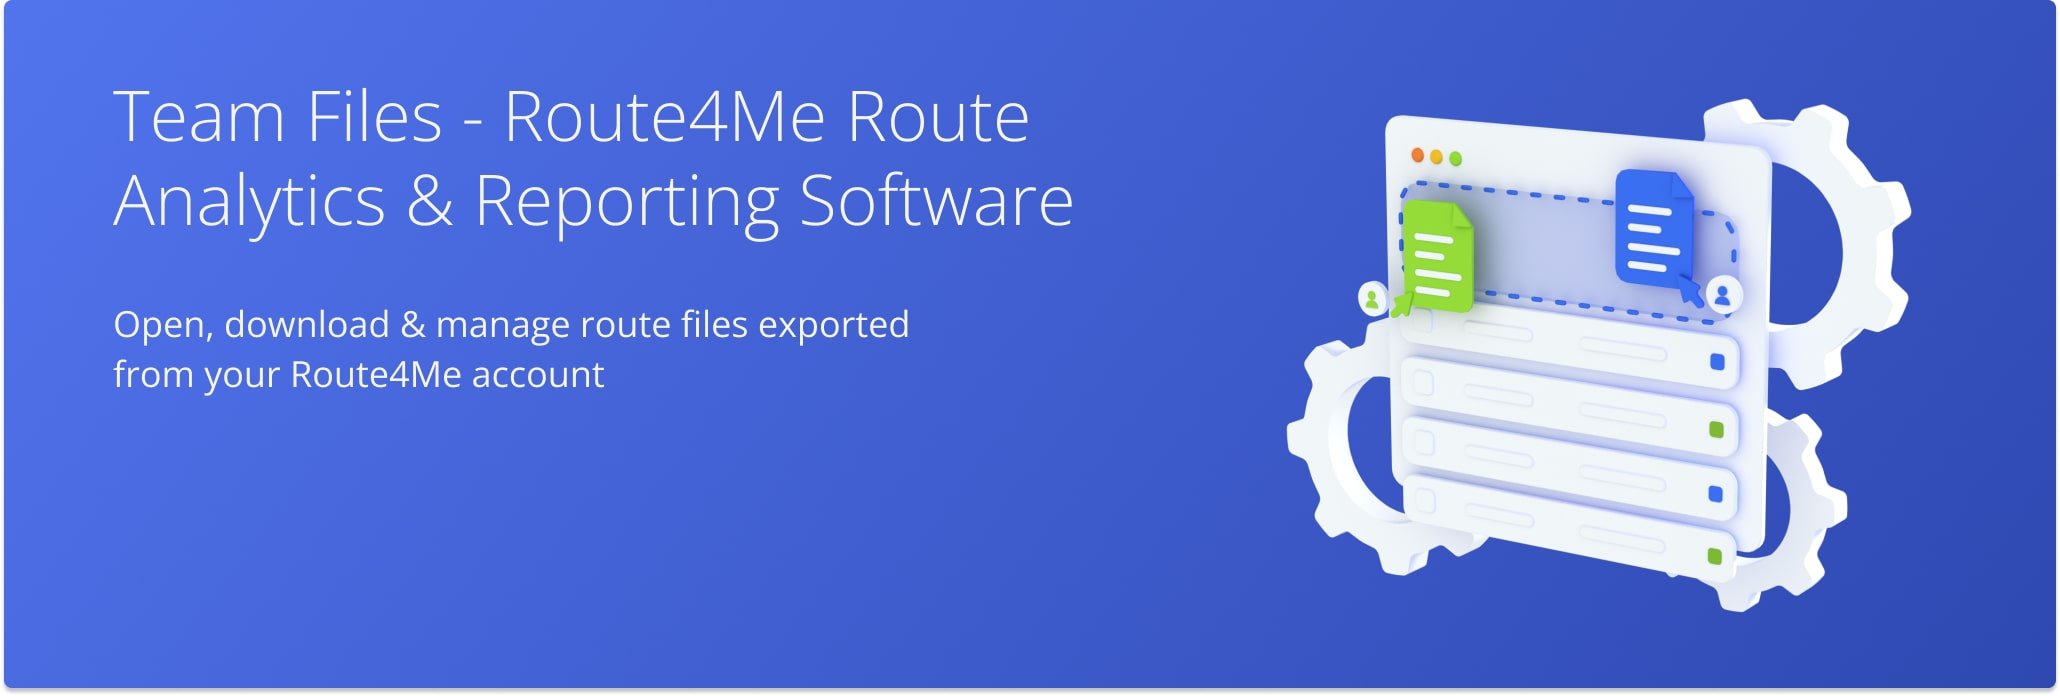 Route4Me saves copies of all files exported from your Route4Me account and stores them in your Team Files.